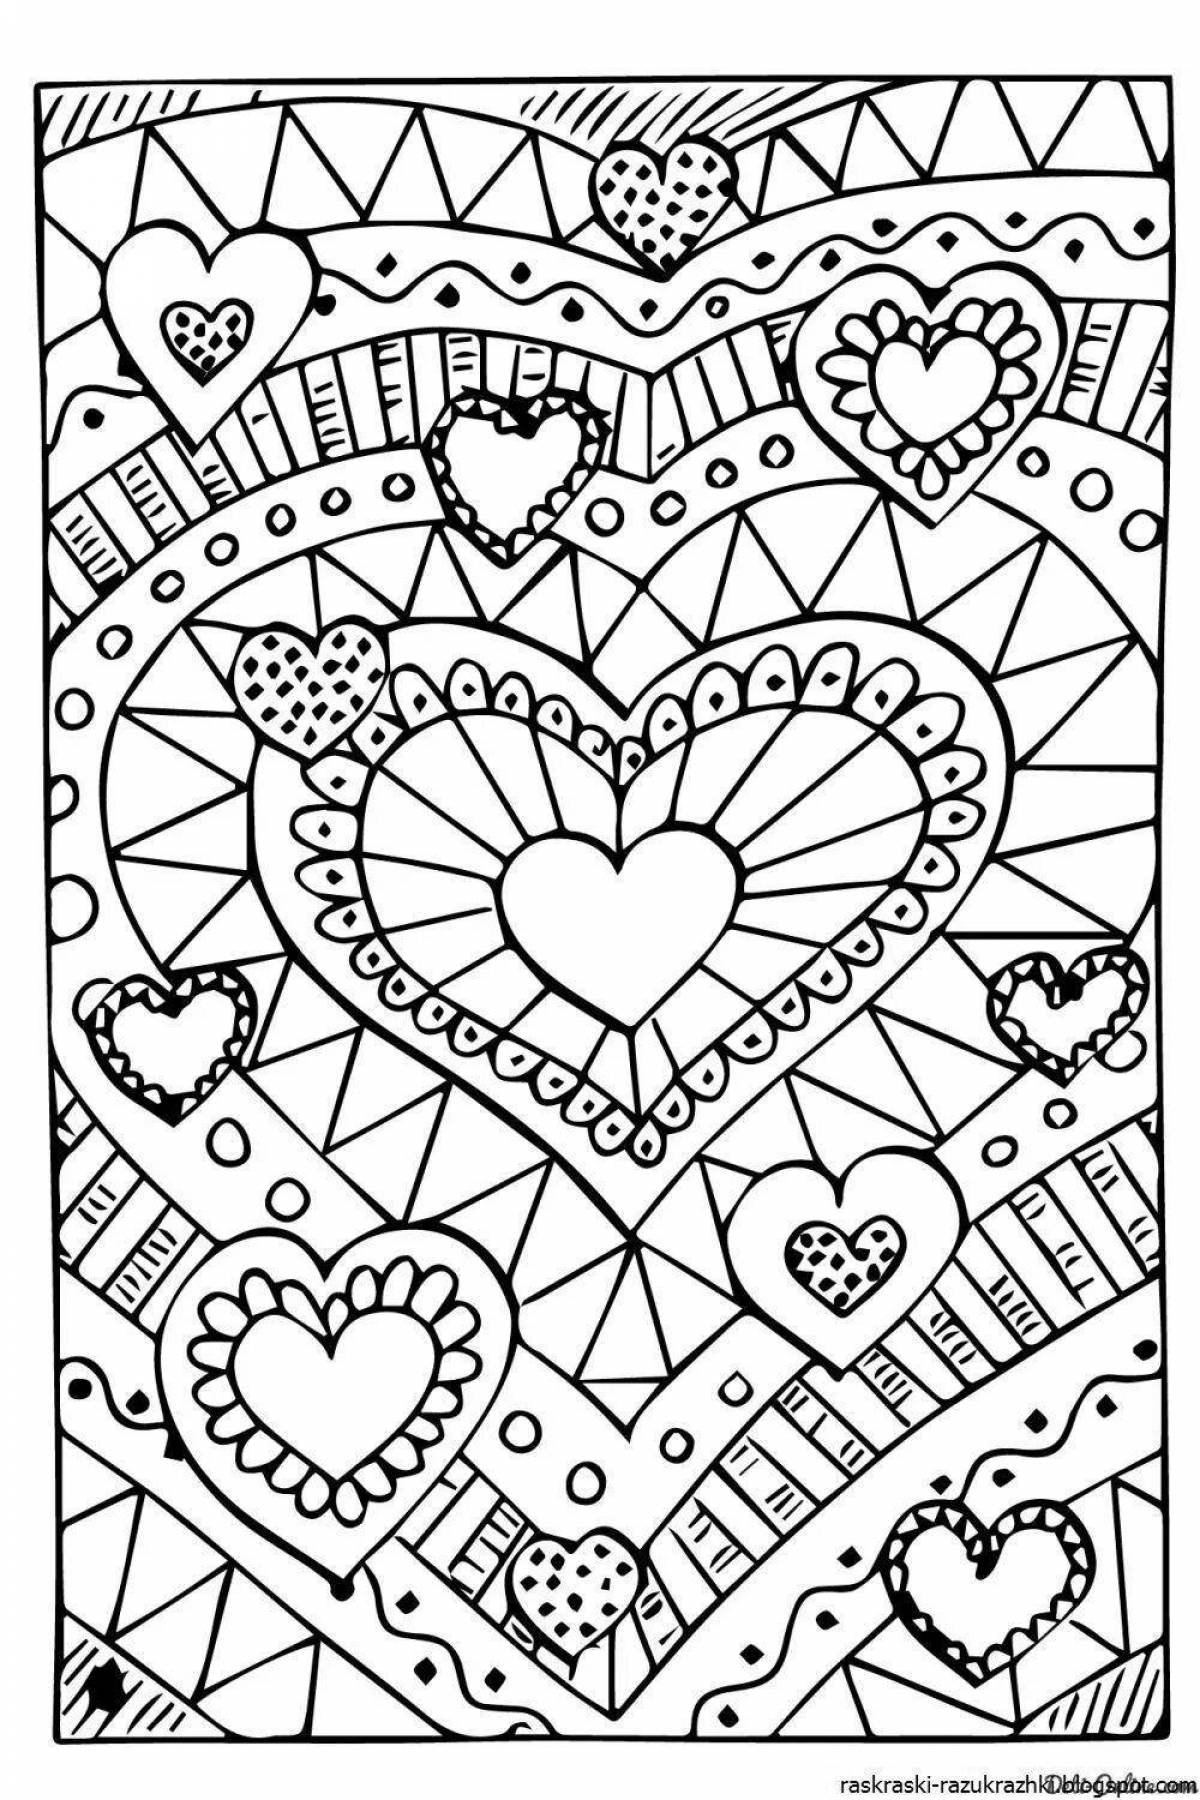 Luminous anti-stress coloring book for girls 9-10 years old